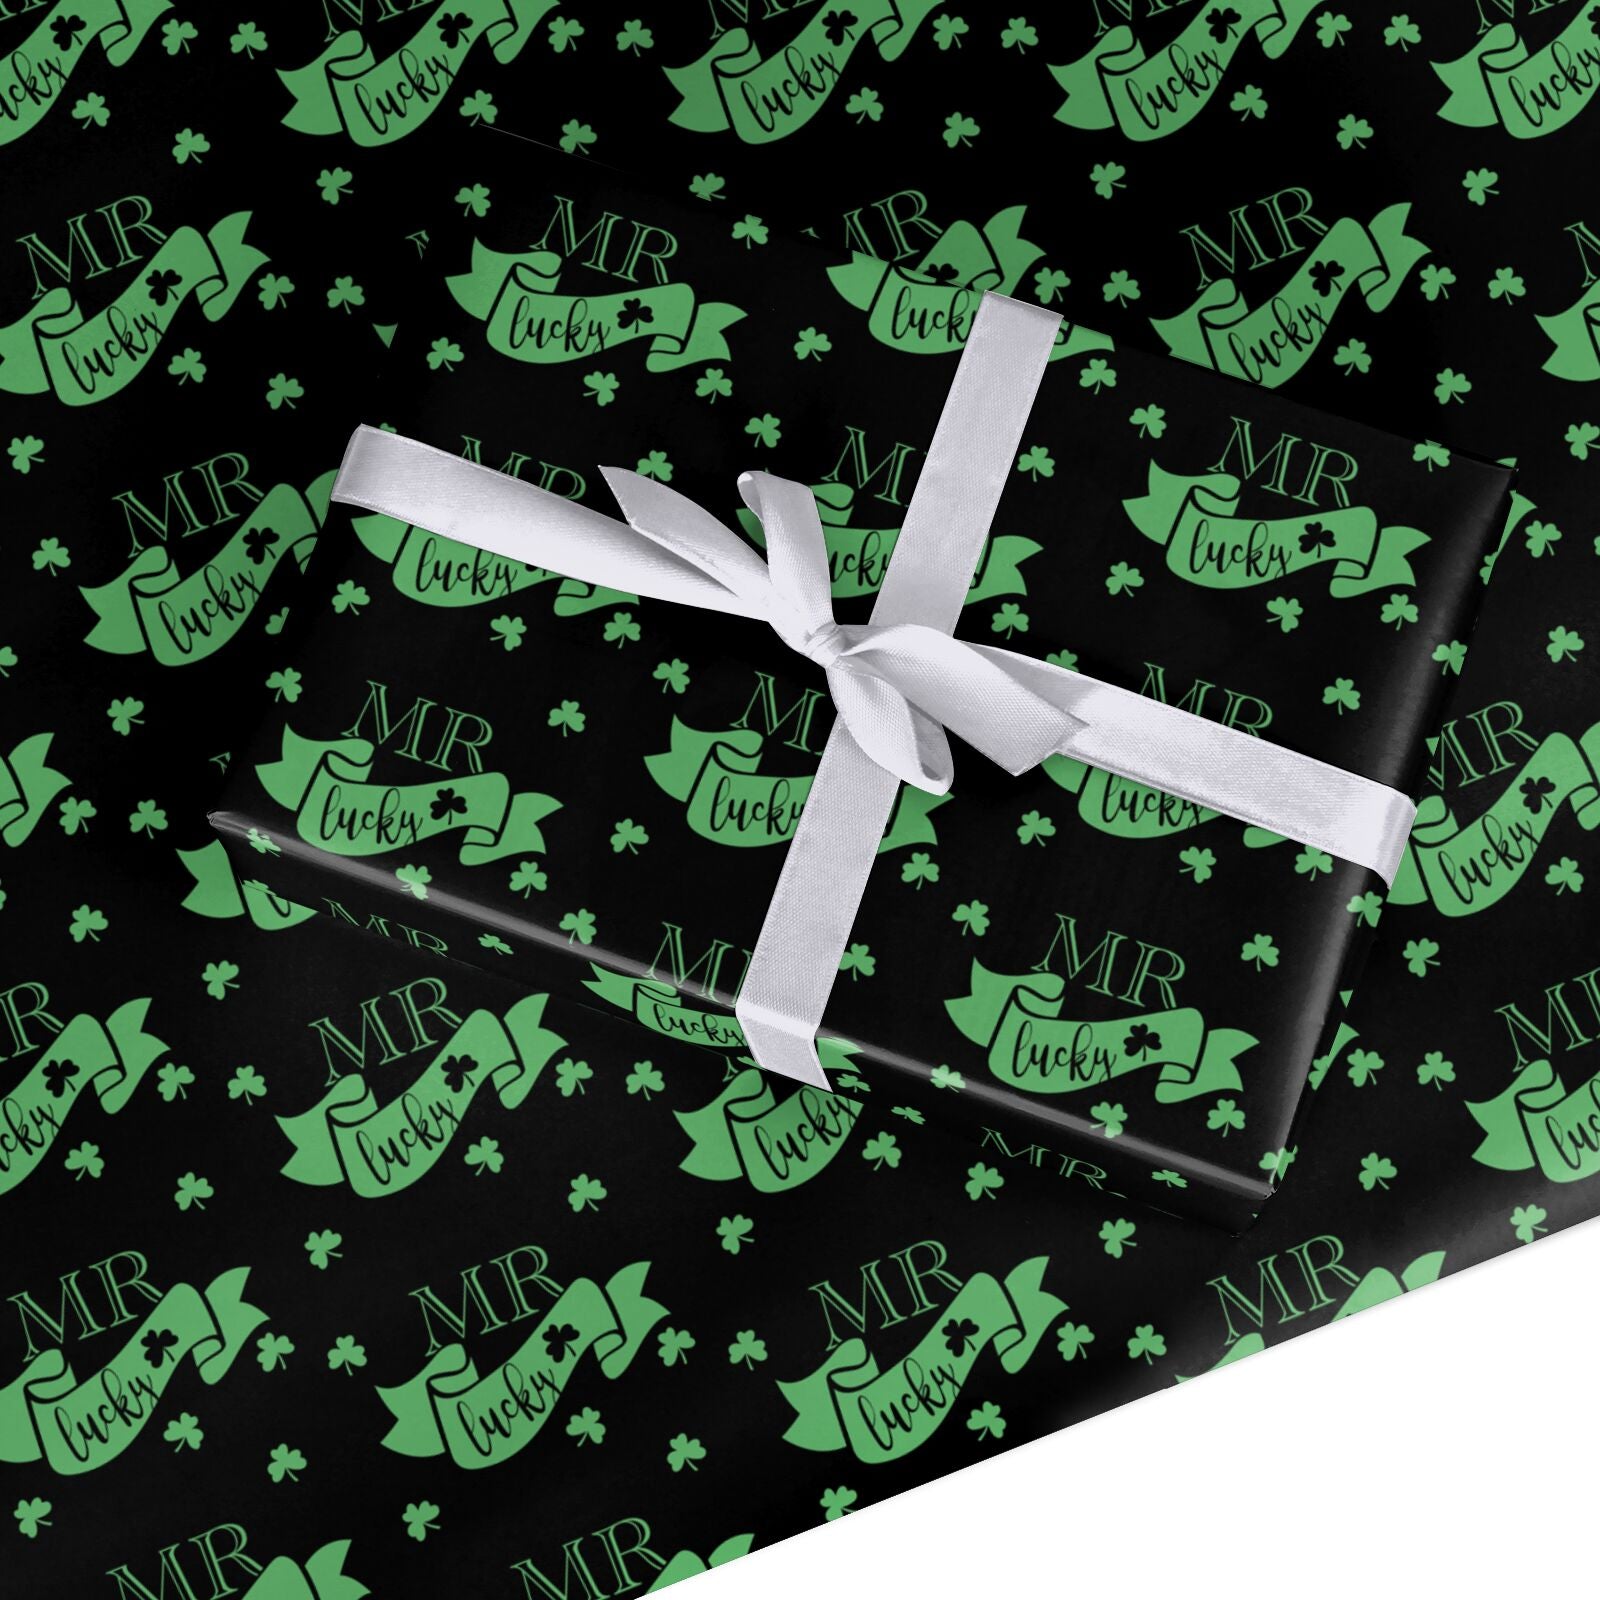 Mr Lucky Custom Wrapping Paper